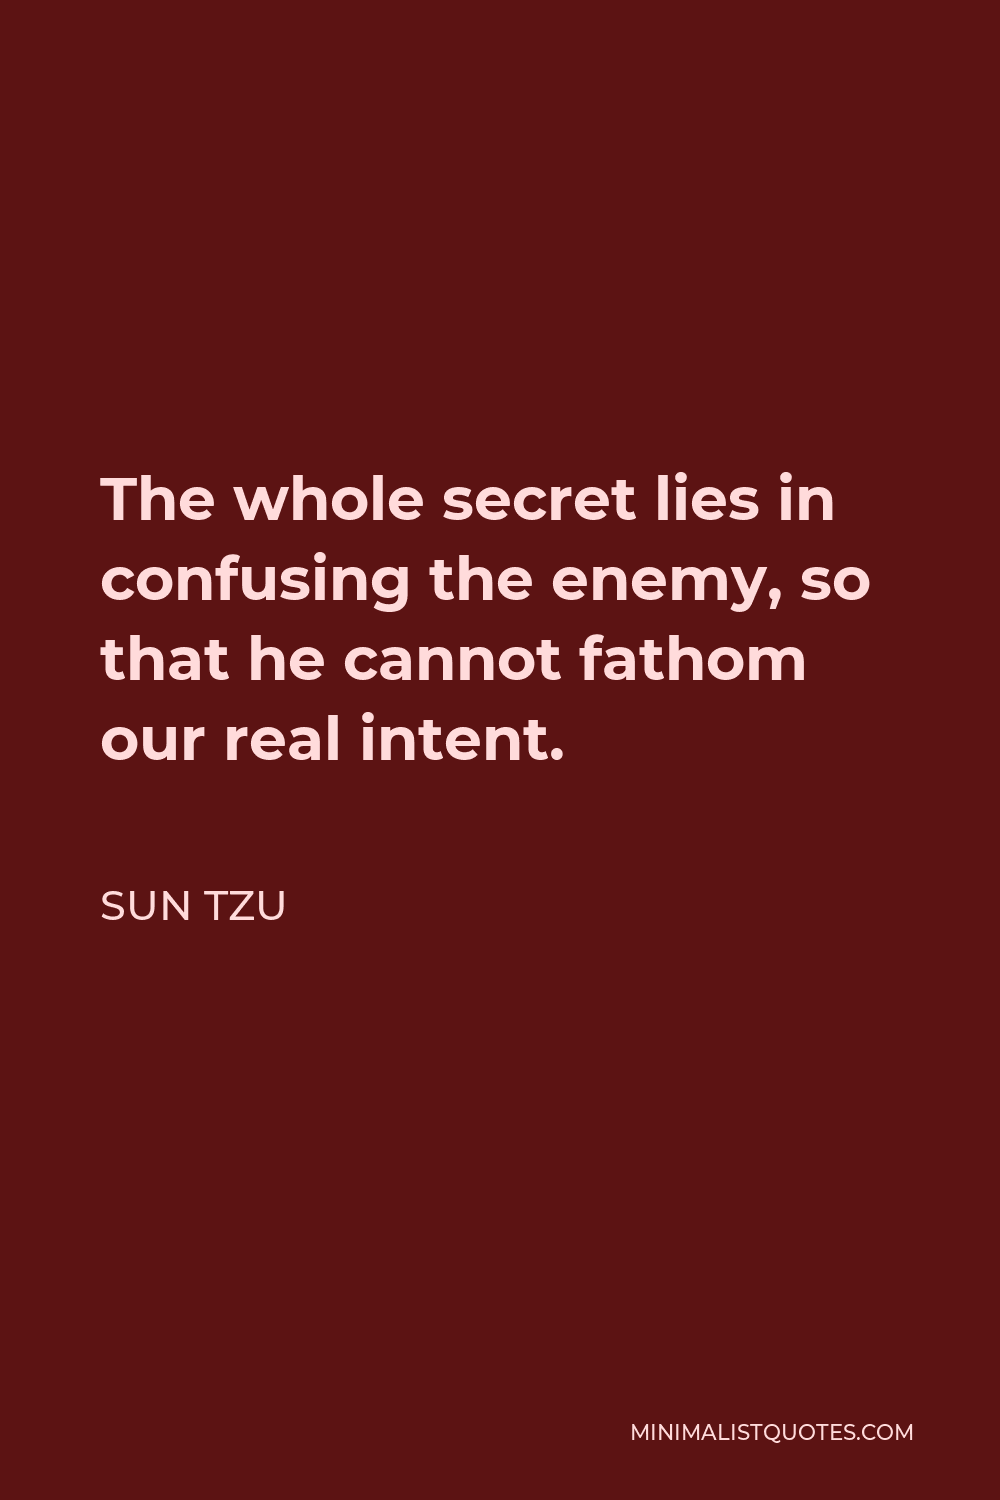 Sun Tzu Quote - The whole secret lies in confusing the enemy, so that he cannot fathom our real intent.